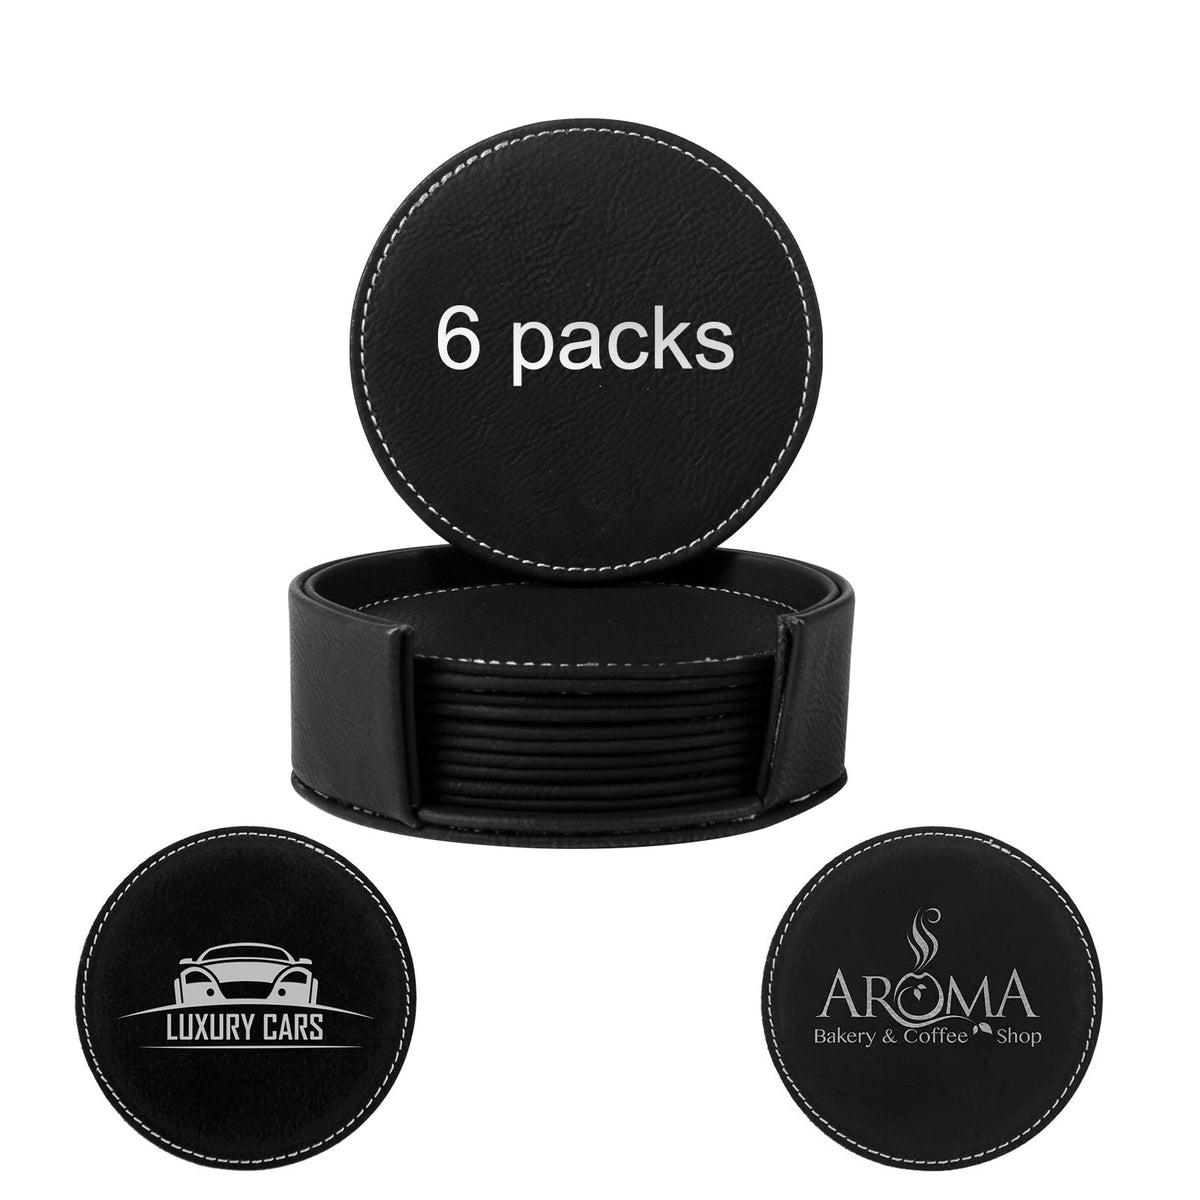 6PCS 3.94 inch Personalized Custom Leather Coaster Round Drink Coasters with Holder